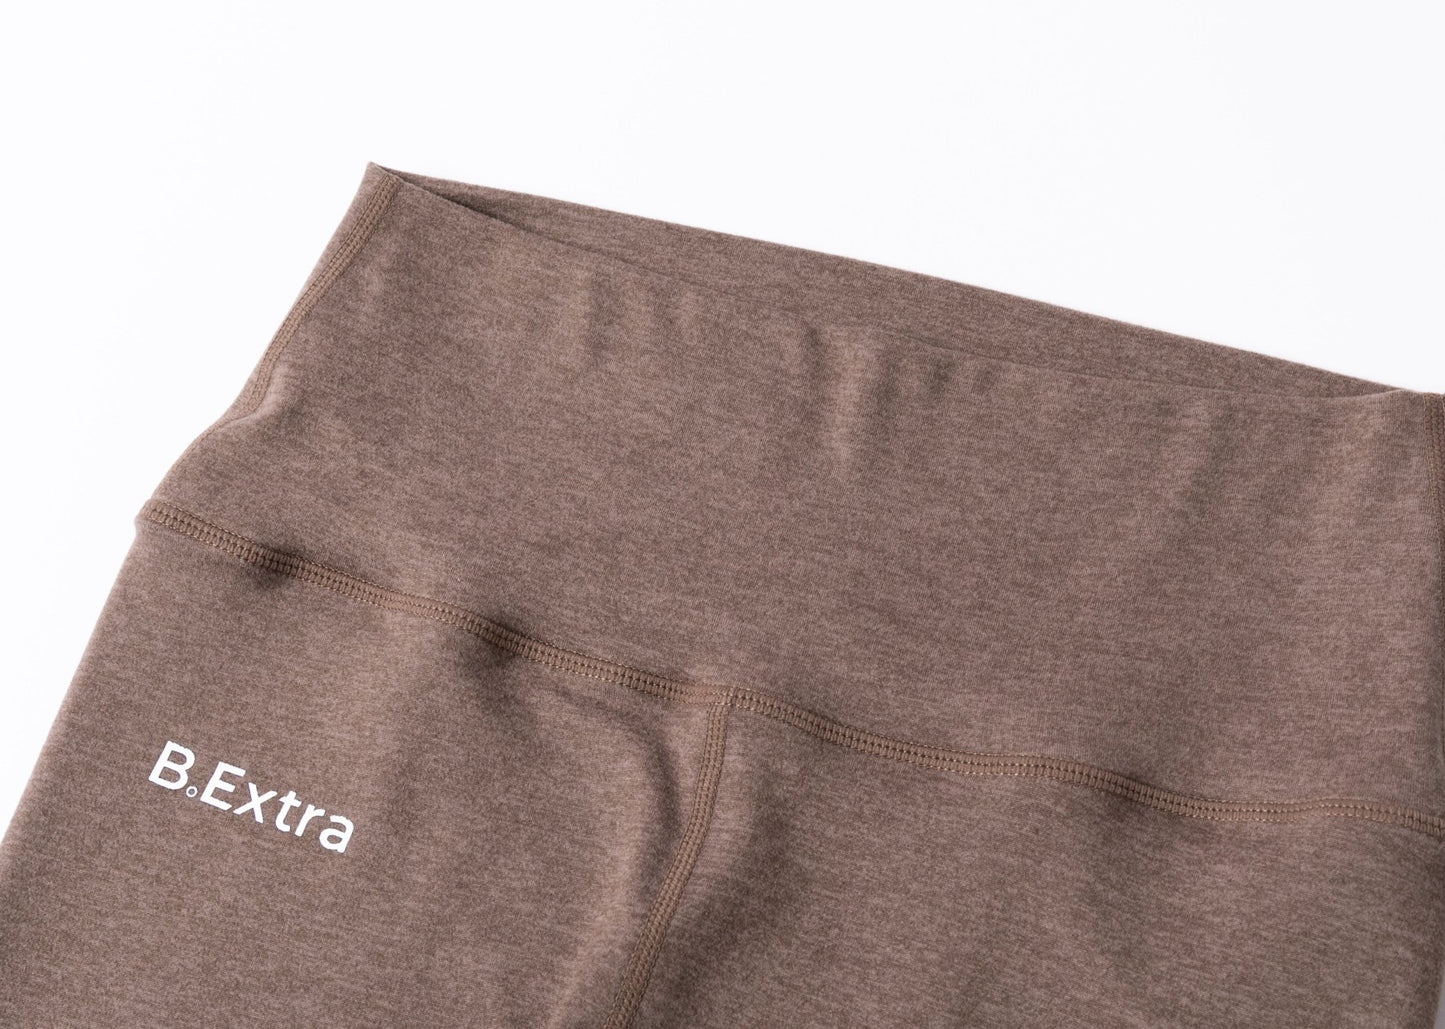 Performance Tight Comfort - Mocca Heather